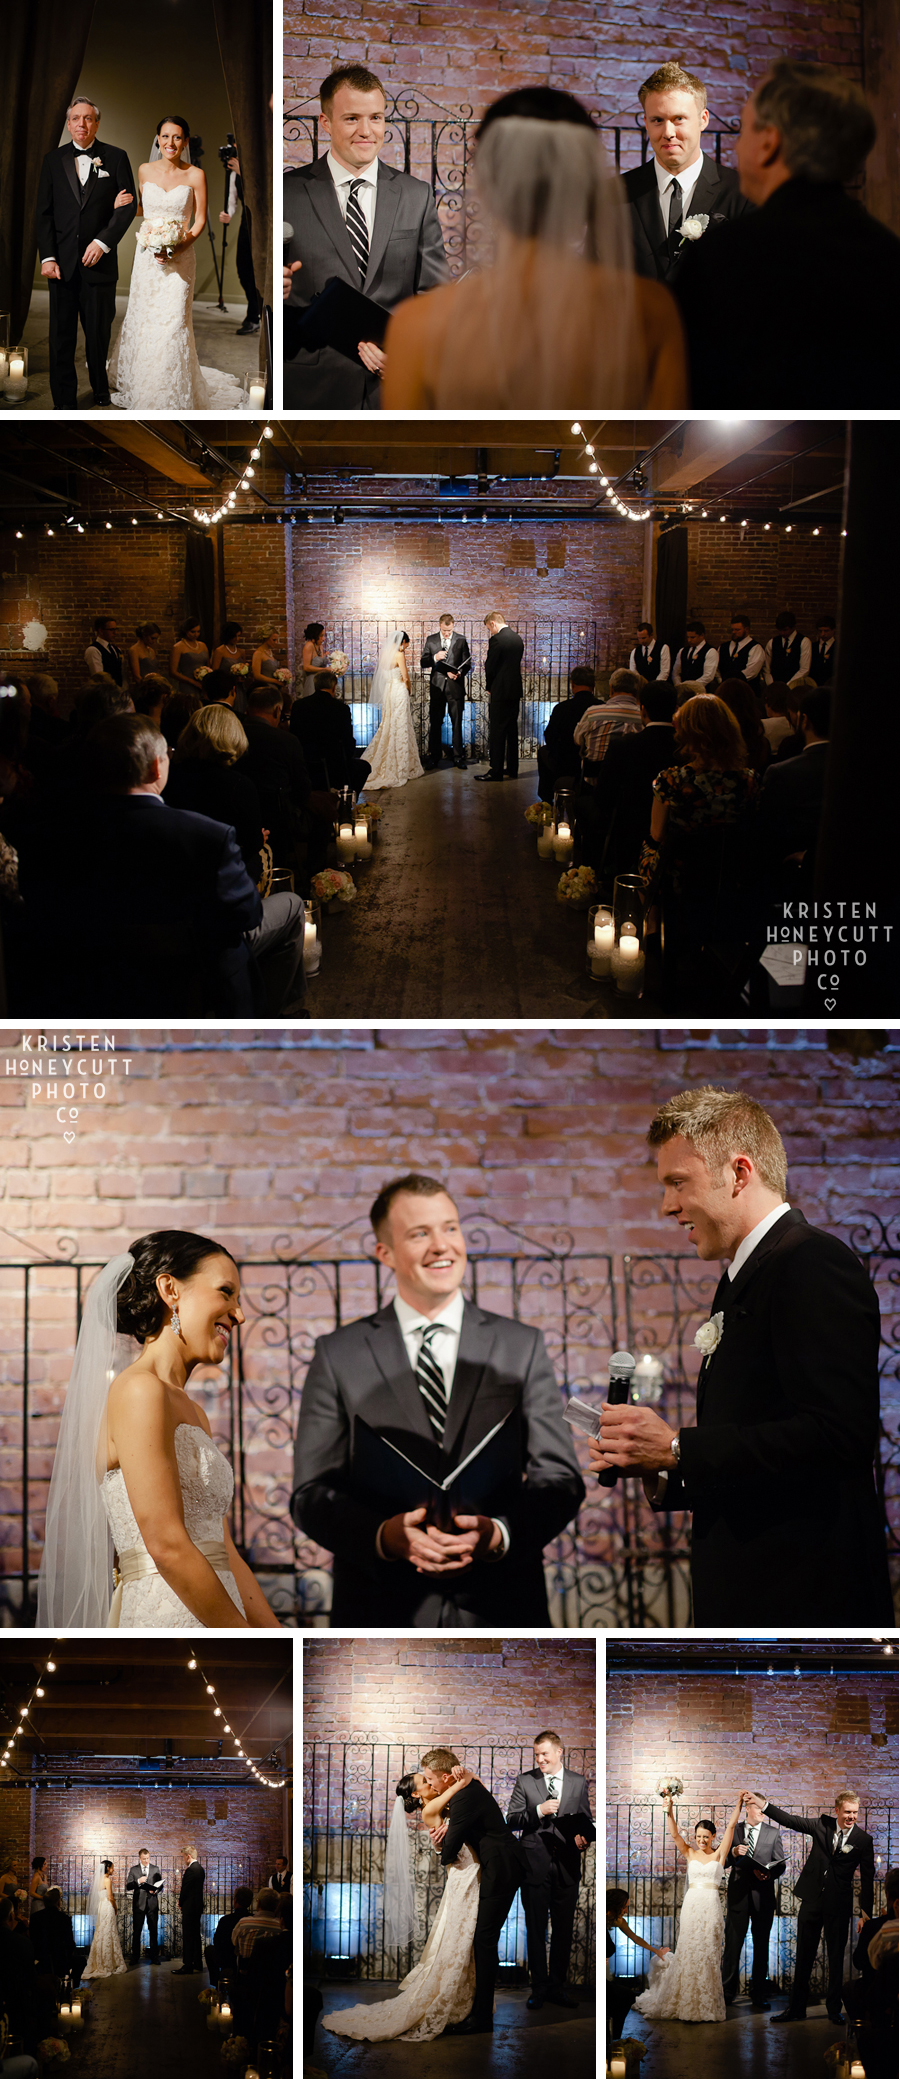 urban wedding ceremony in front of exposed brick wall